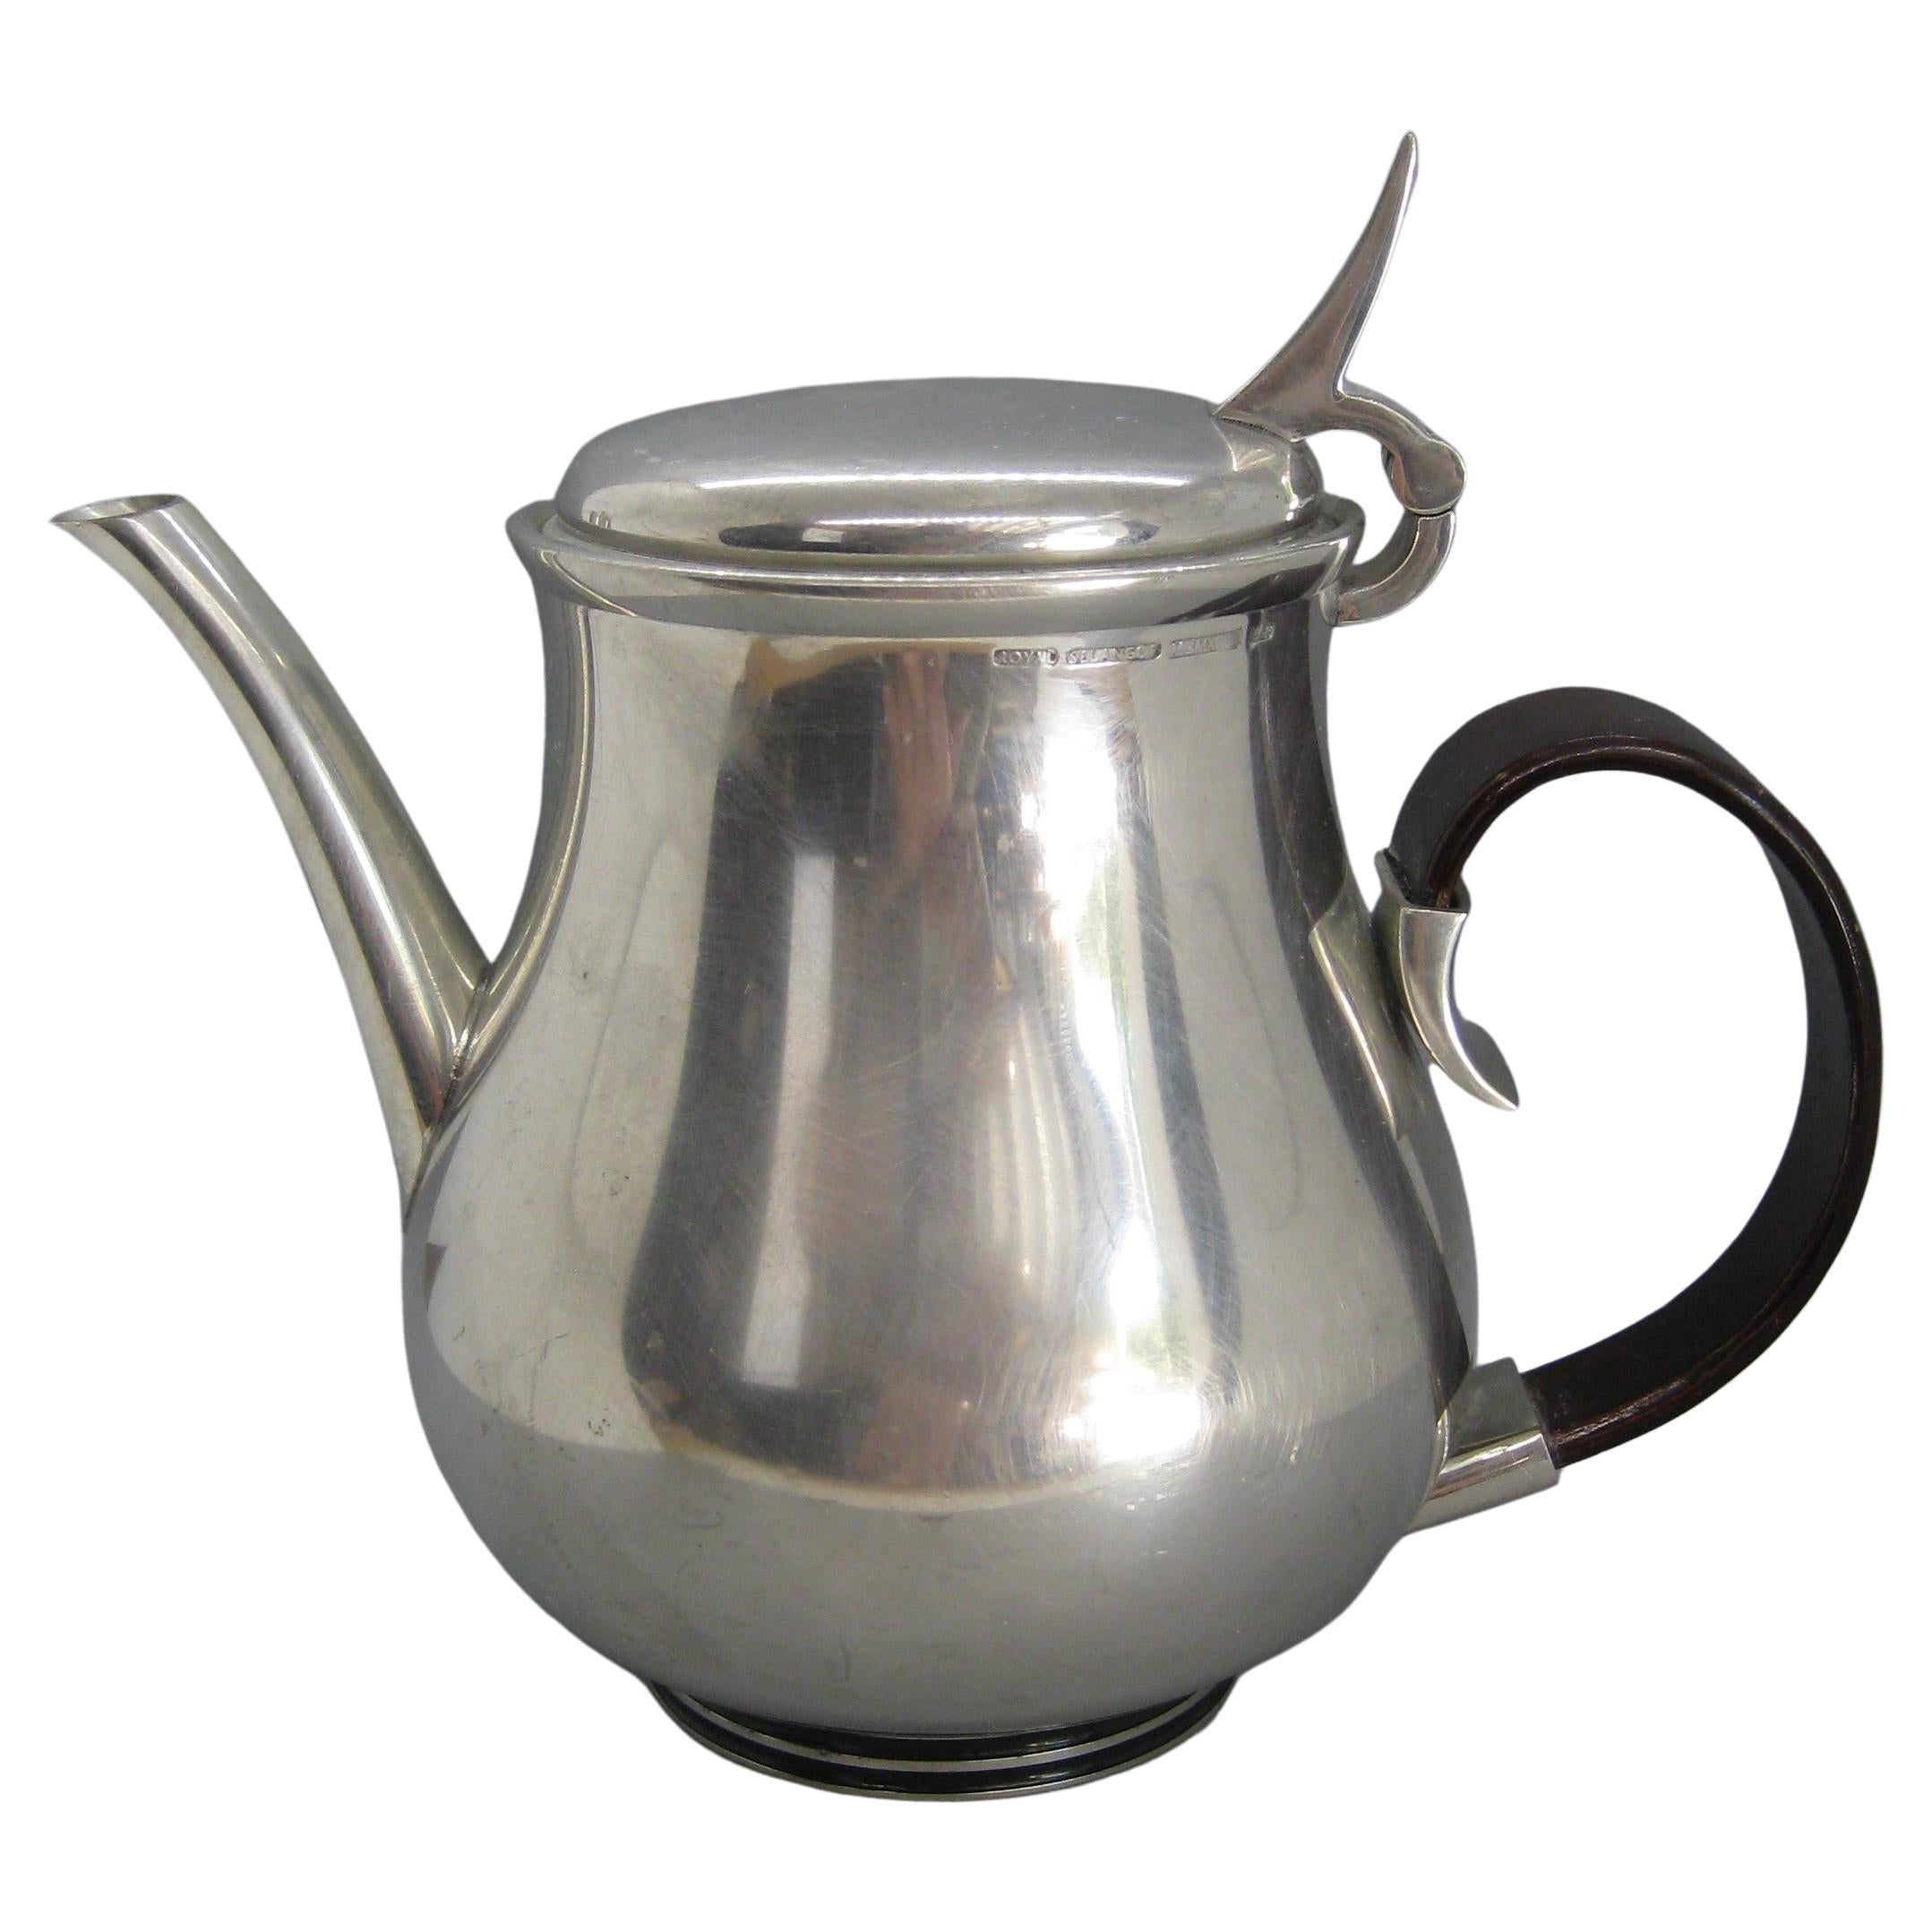 What are English teapots made of?